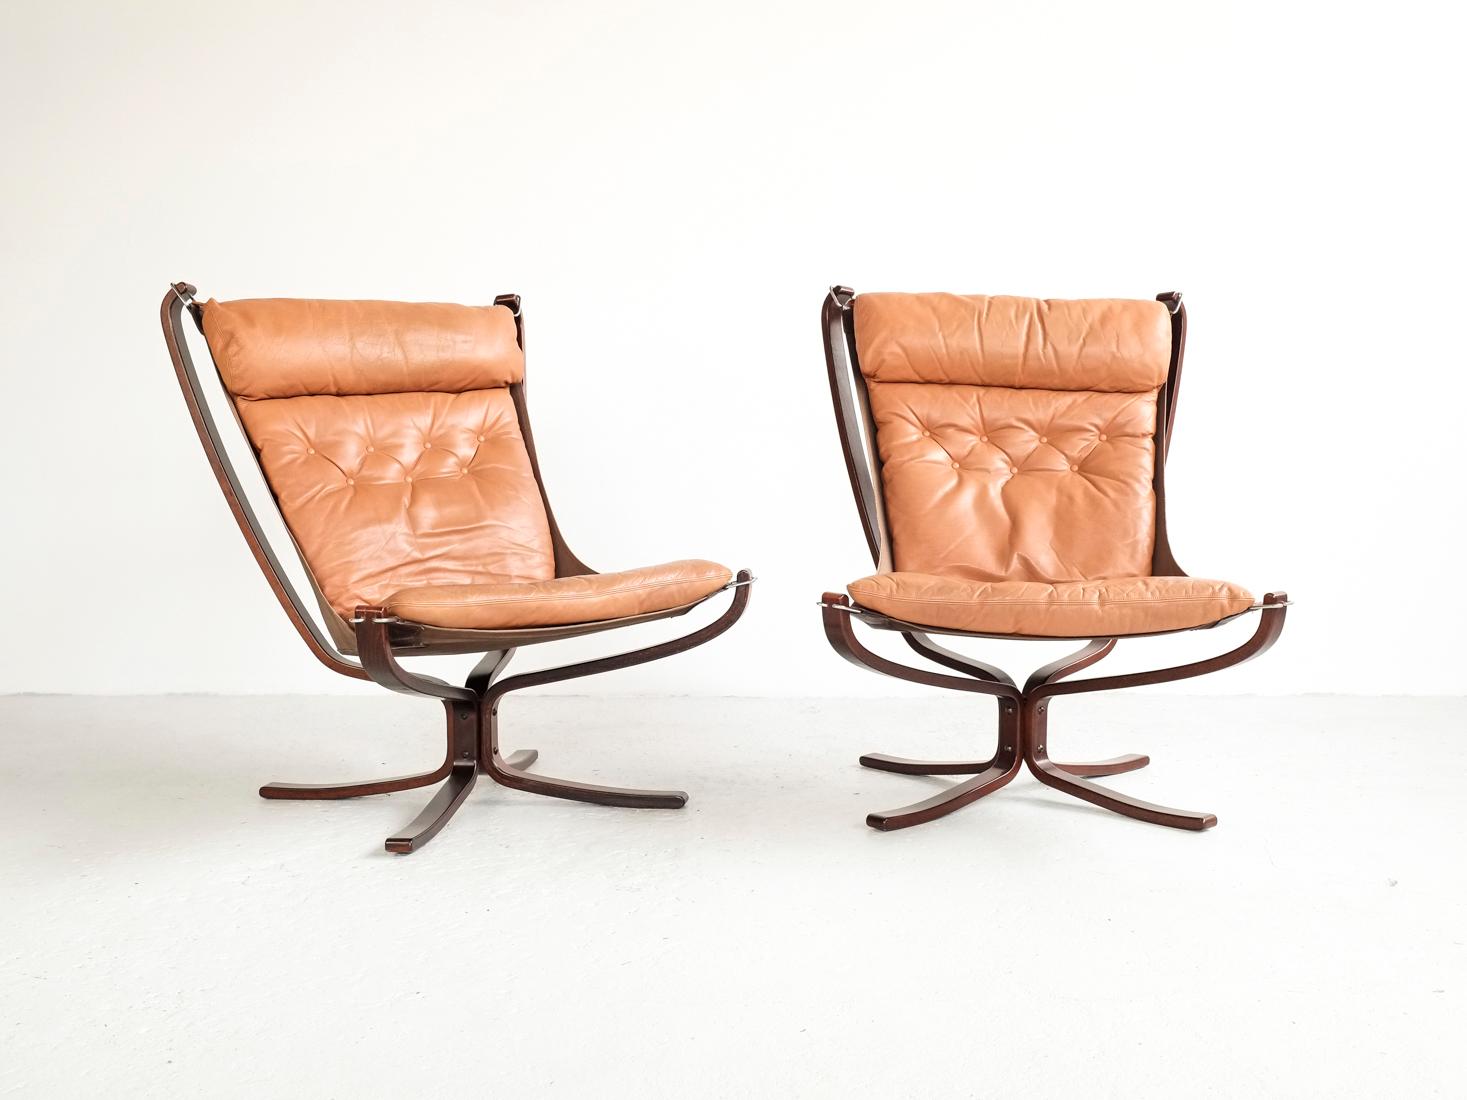 Midcentury pair of Falcon Chairs designed by Sigurd Ressell and manufactured by Vatne Møbler in Norway in the 1970s. It is the model with high back and padded leather. The frame is in dark stained beech, the canvas is dark brown, and the cushion is